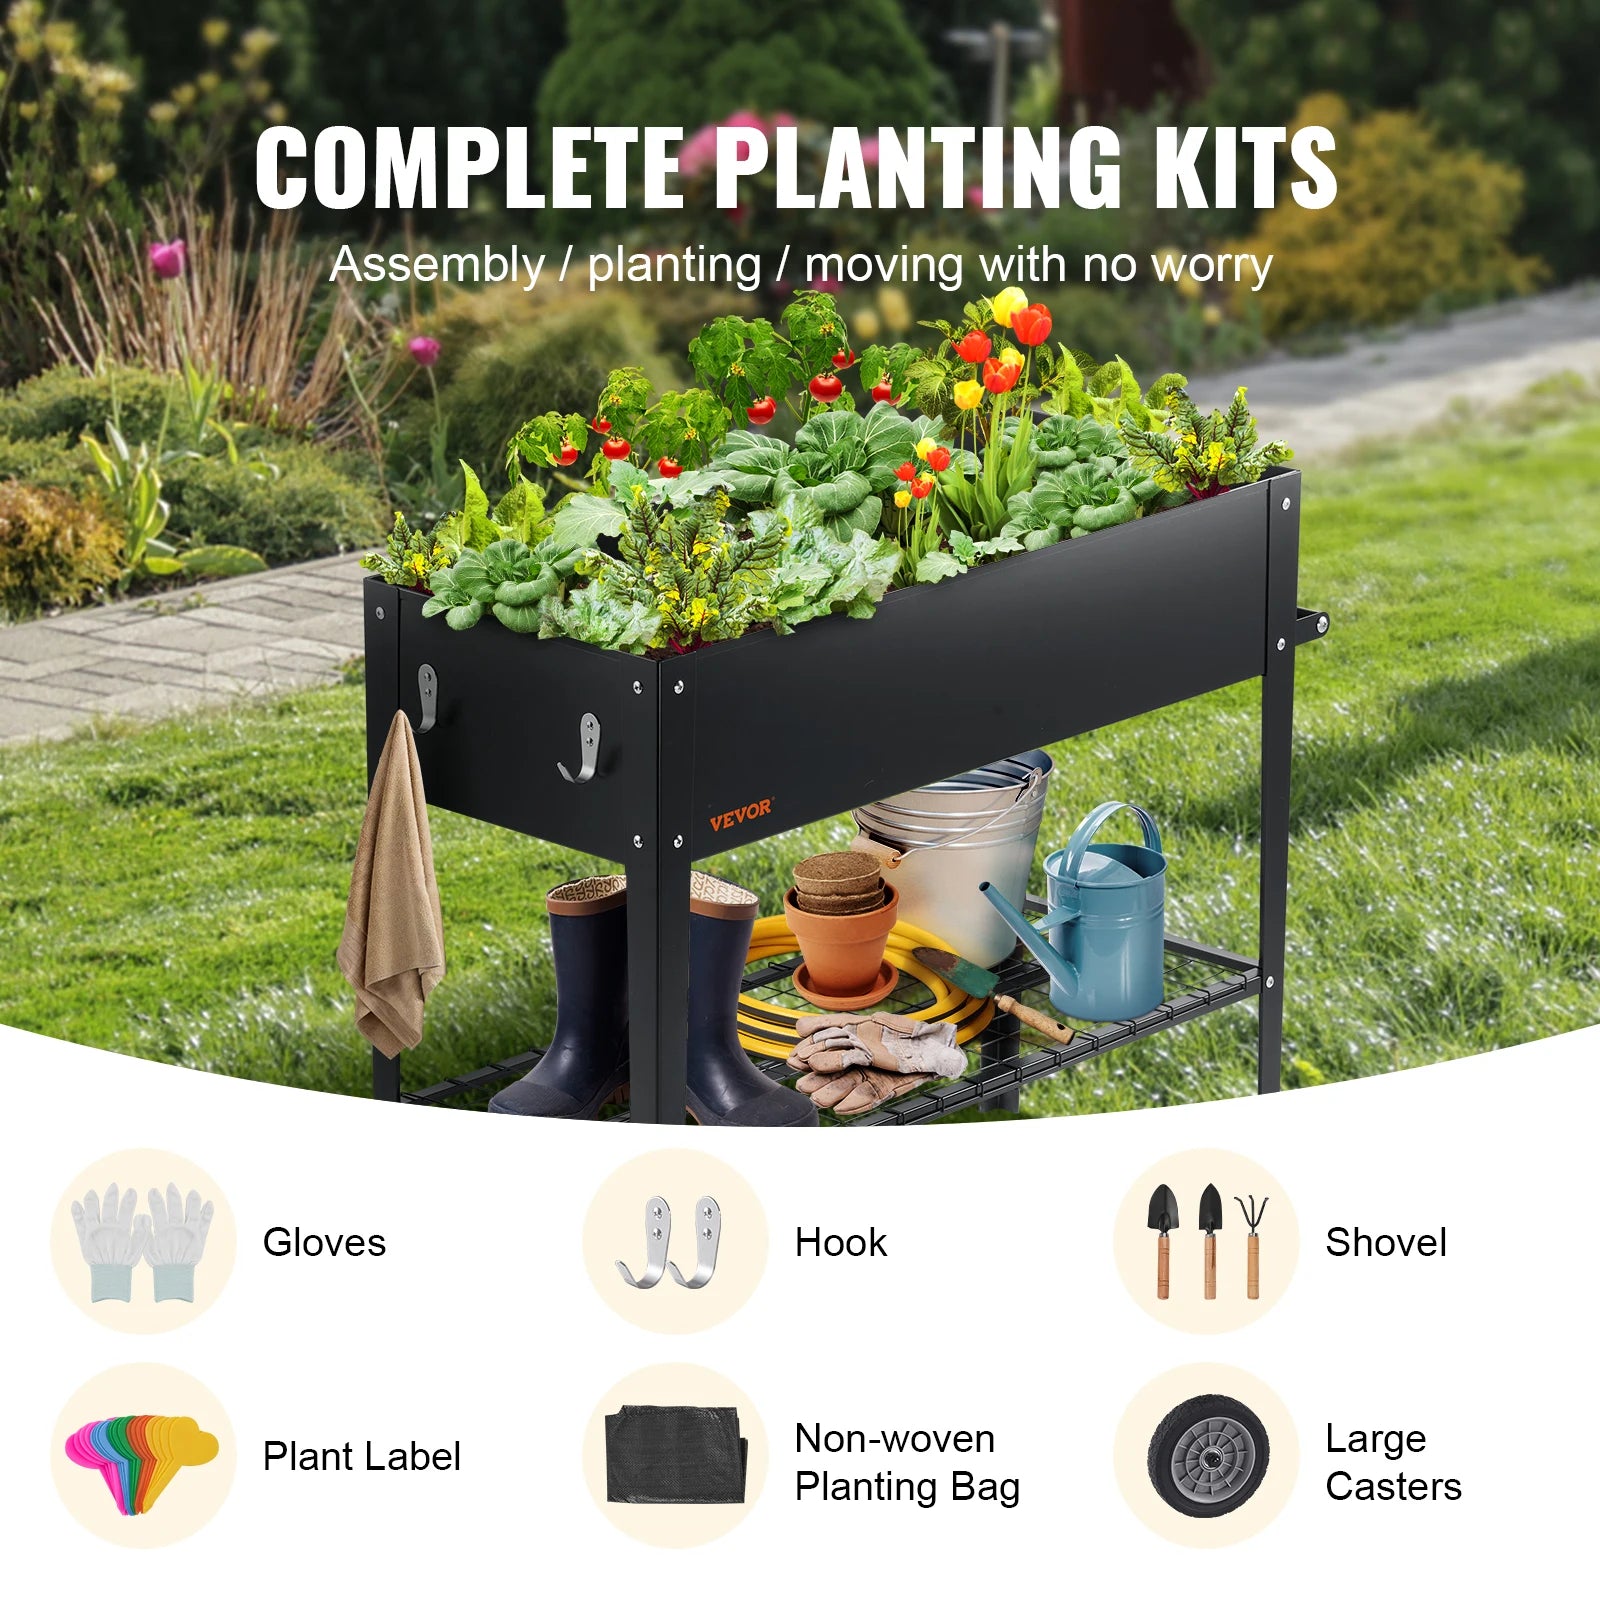 VEVOR Raised Garden Bed, 42.5 x 19.5 x 31.5 inch Galvanized Metal Planter Box, Elevated Outdoor Planting Boxes with Legs, Black